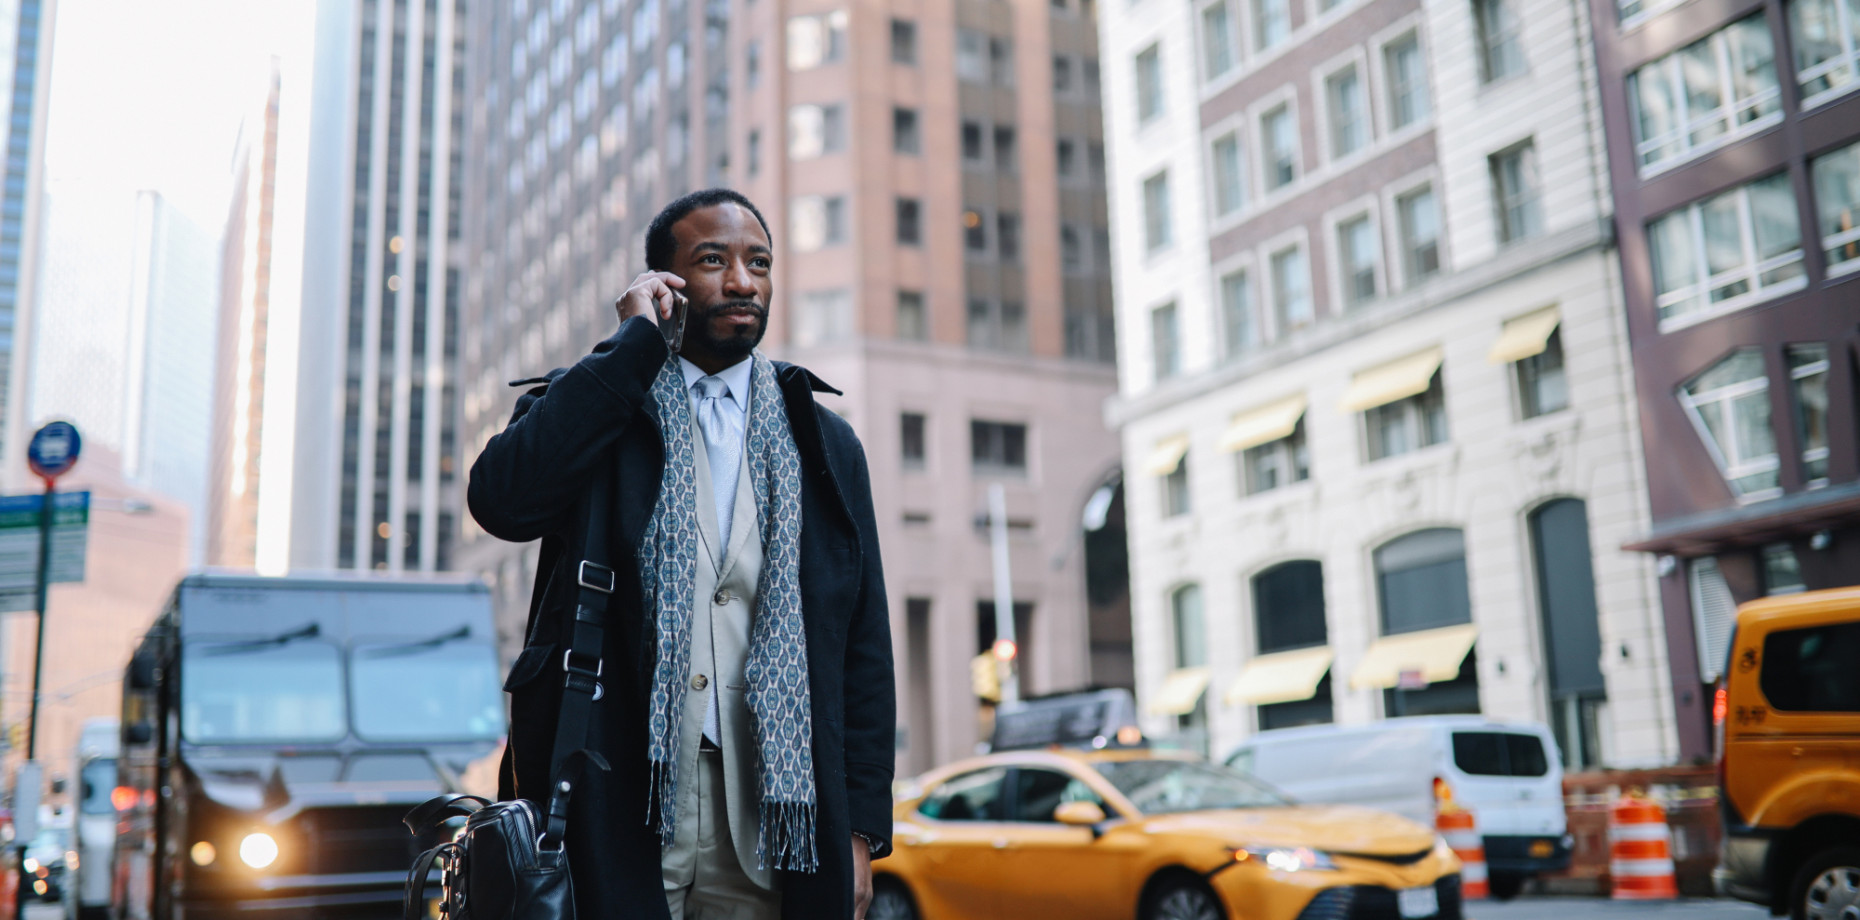 Businessman on the phone in New York